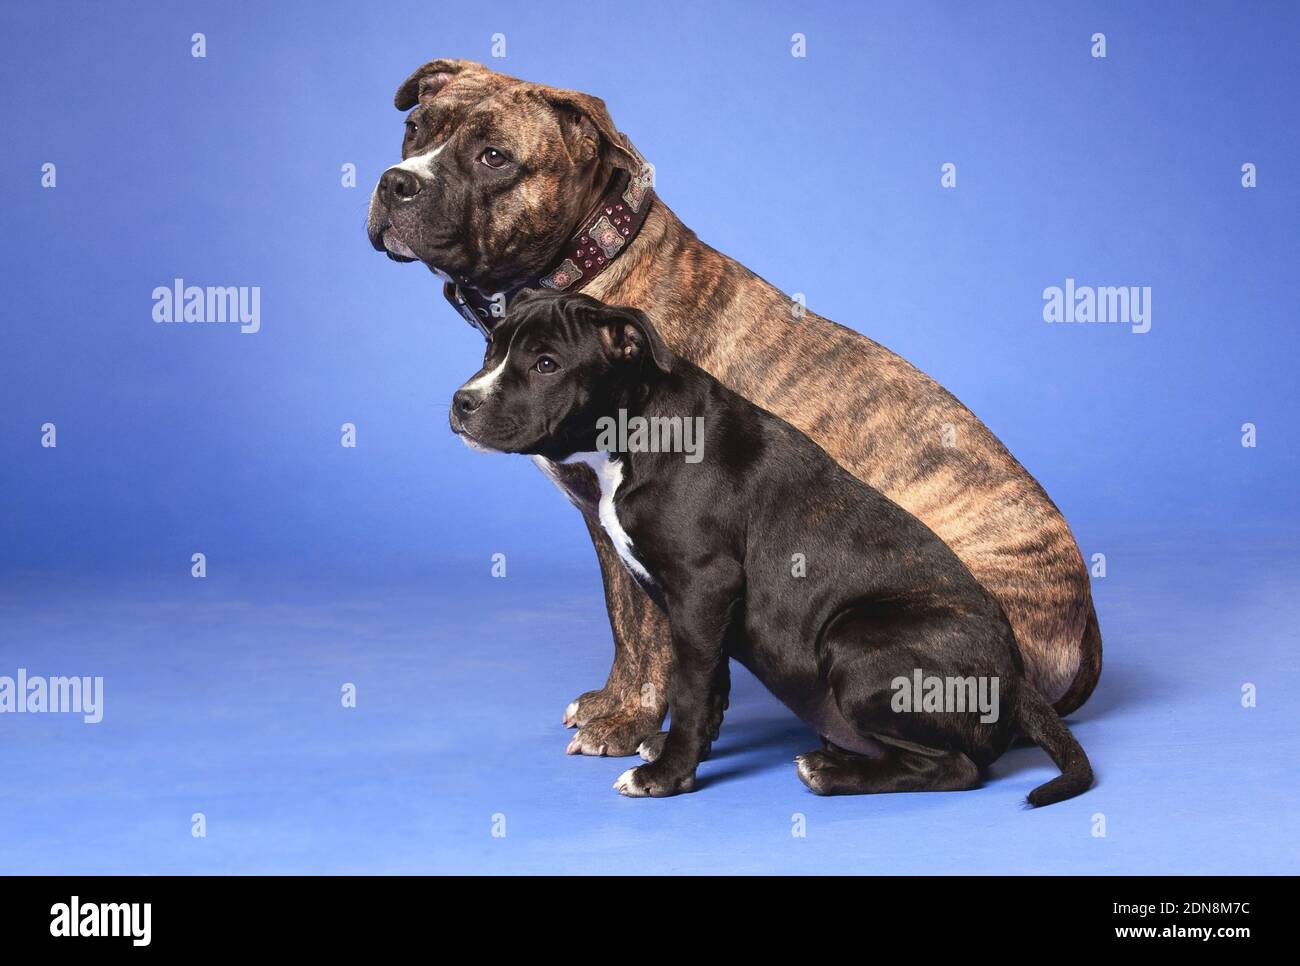 Two dogs, an adult and a puppy, breed American Staffordshire Terrier, brown tiger and black with white, sitting in a studio indoors, on a blue backgro Stock Photo